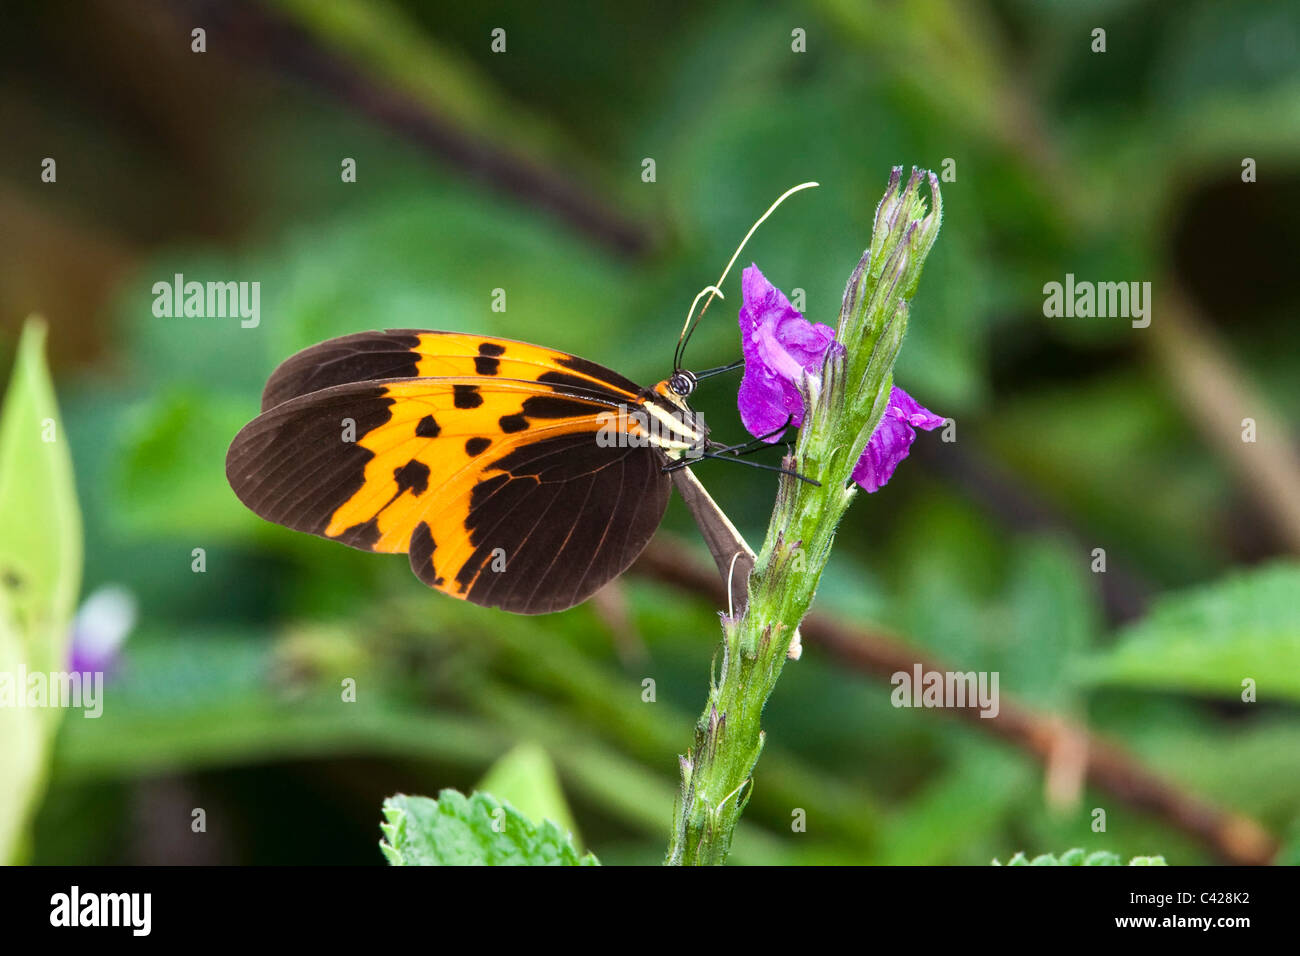 Peru, San Pedro, Manu National Park, Cloud forest. Butterfly. UNESCO World Heritage Site. Stock Photo